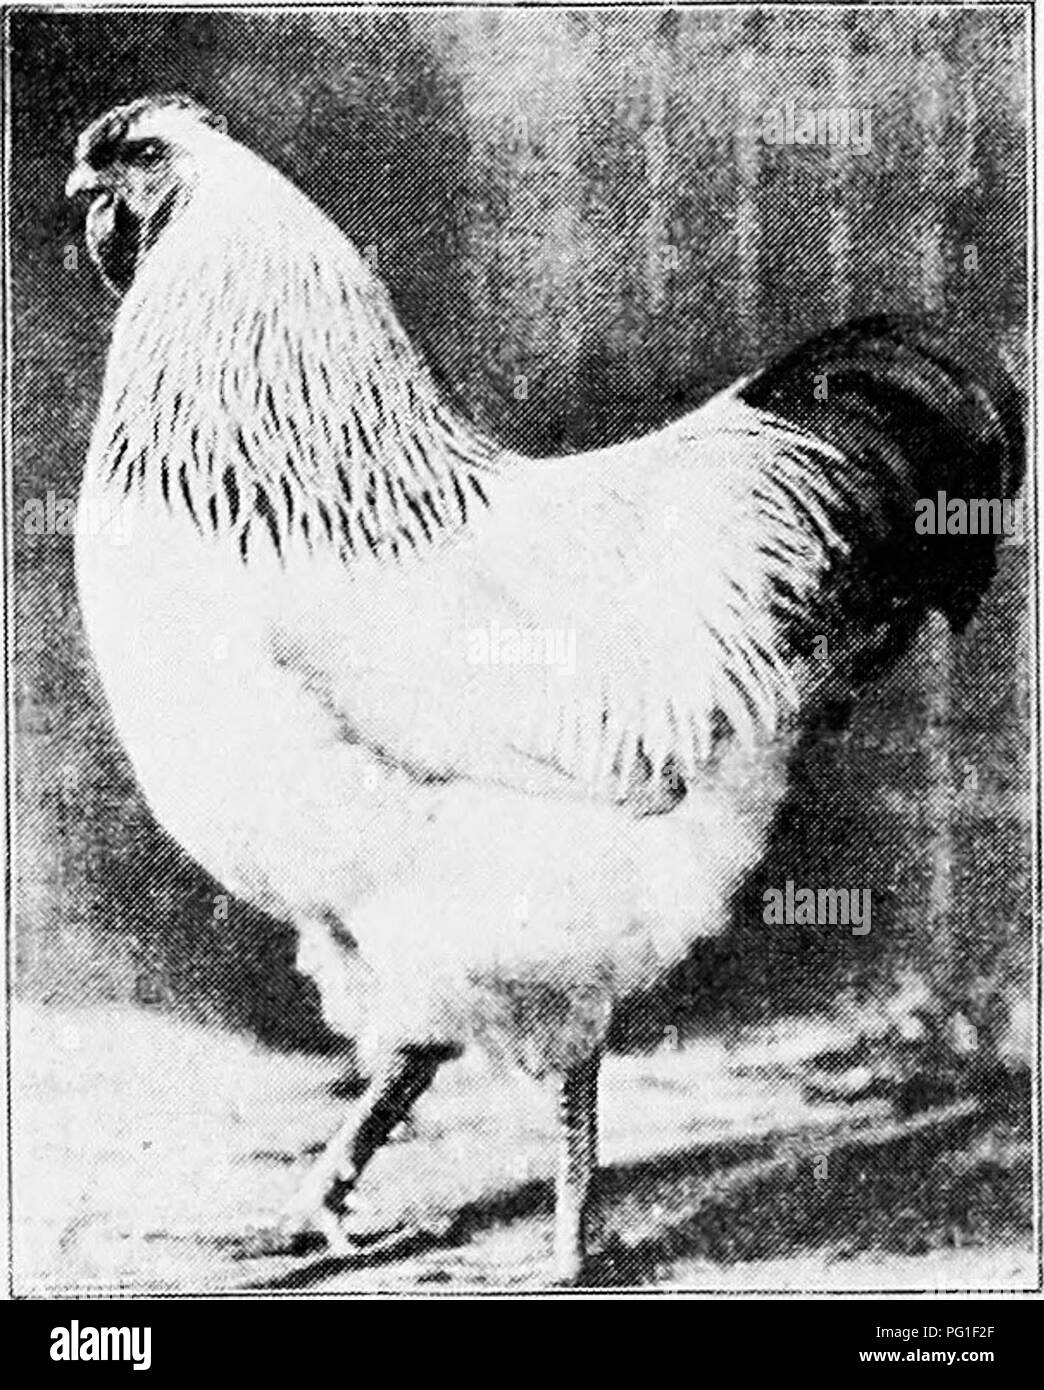 . Principles and practice of poultry culture . Poultry. 412 POULTRY CULTURE. Fig. 417. Columbian Wyandotte cockerel D. Lincoln Orr, Orr's Mills^ New York (Photograph by Sewell) The Silvei'-Penciled Wyan- dotte was produced almost simultaneously with the Brack- enbury-Cornell strain of the foregoing variety, by the same breeders, and was admitted to the Standard only a year later, in 1902. This variety was made by mating a Dark Brahma hen to a Partridge Wyandotte male, and Dark Brahma and Silver-Penciled Hamburg females to a Silver- Laced Wyandotte male, and by breeding selected speci- mens fro Stock Photo